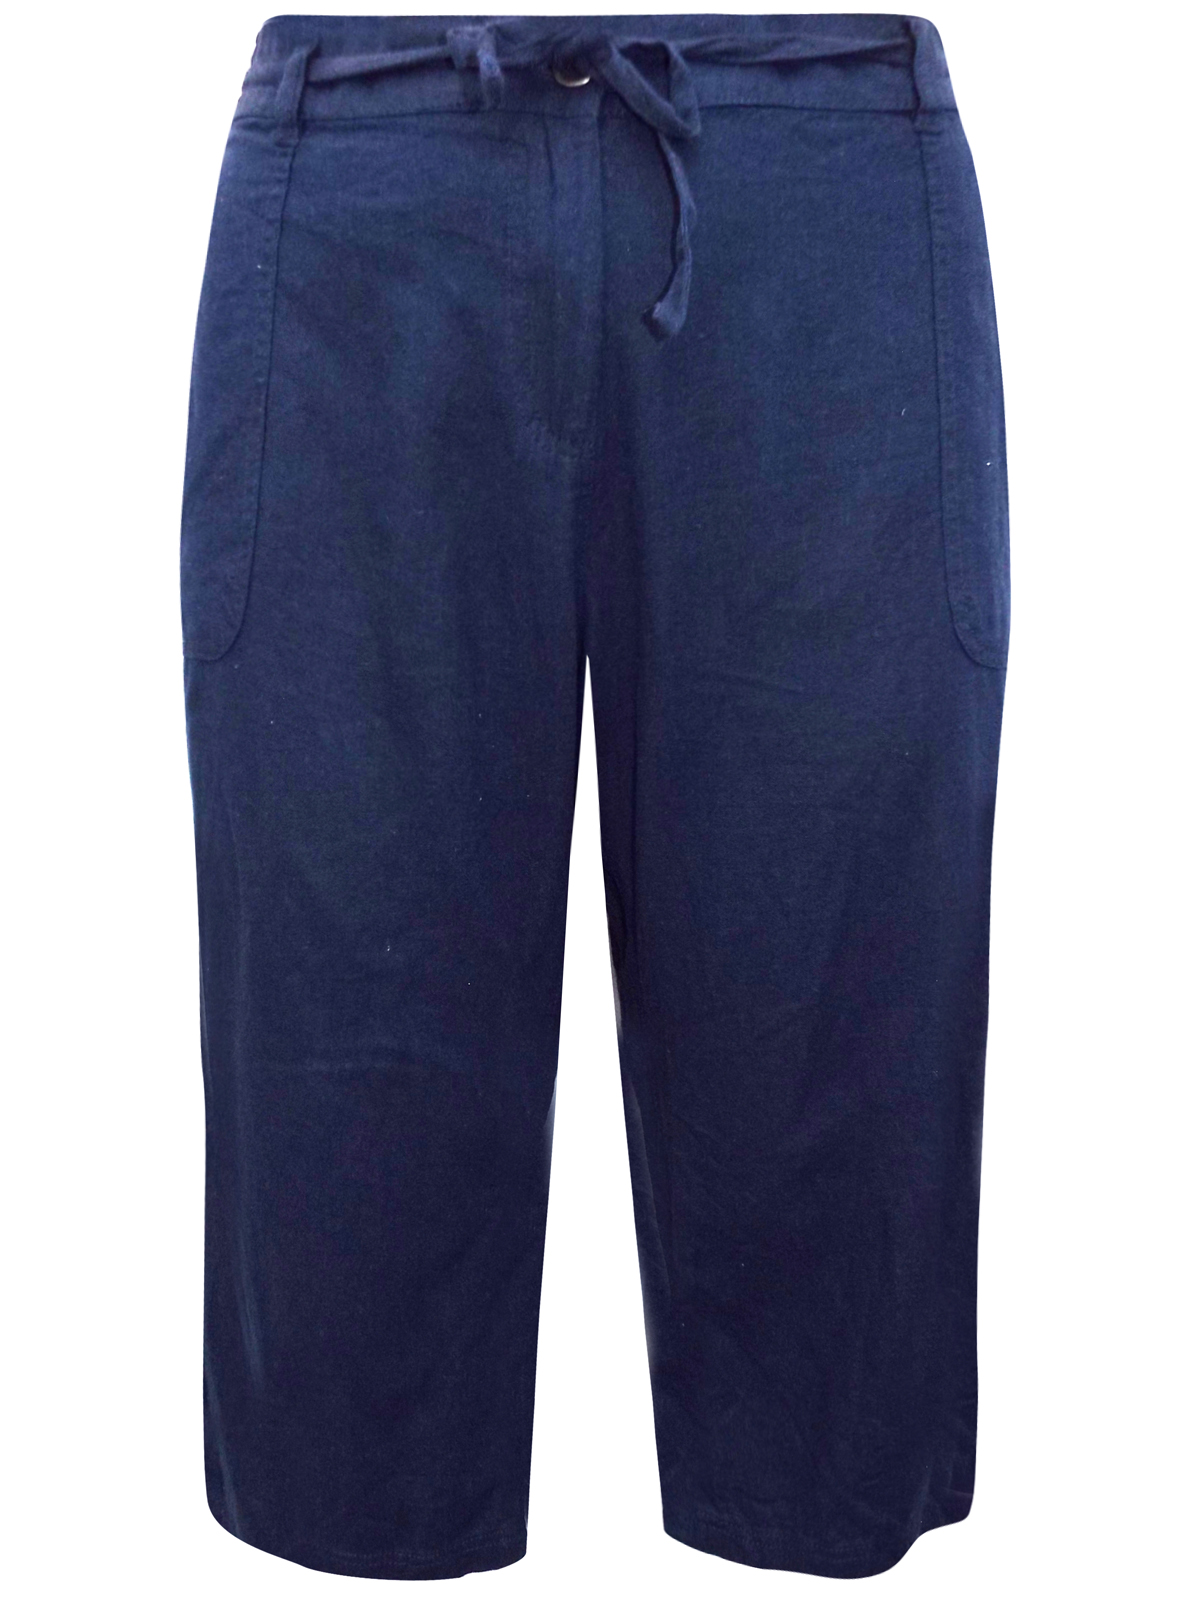 N3xt Parallel NAVY Linen Blend Cropped Trousers - Plus Size 26 to 36